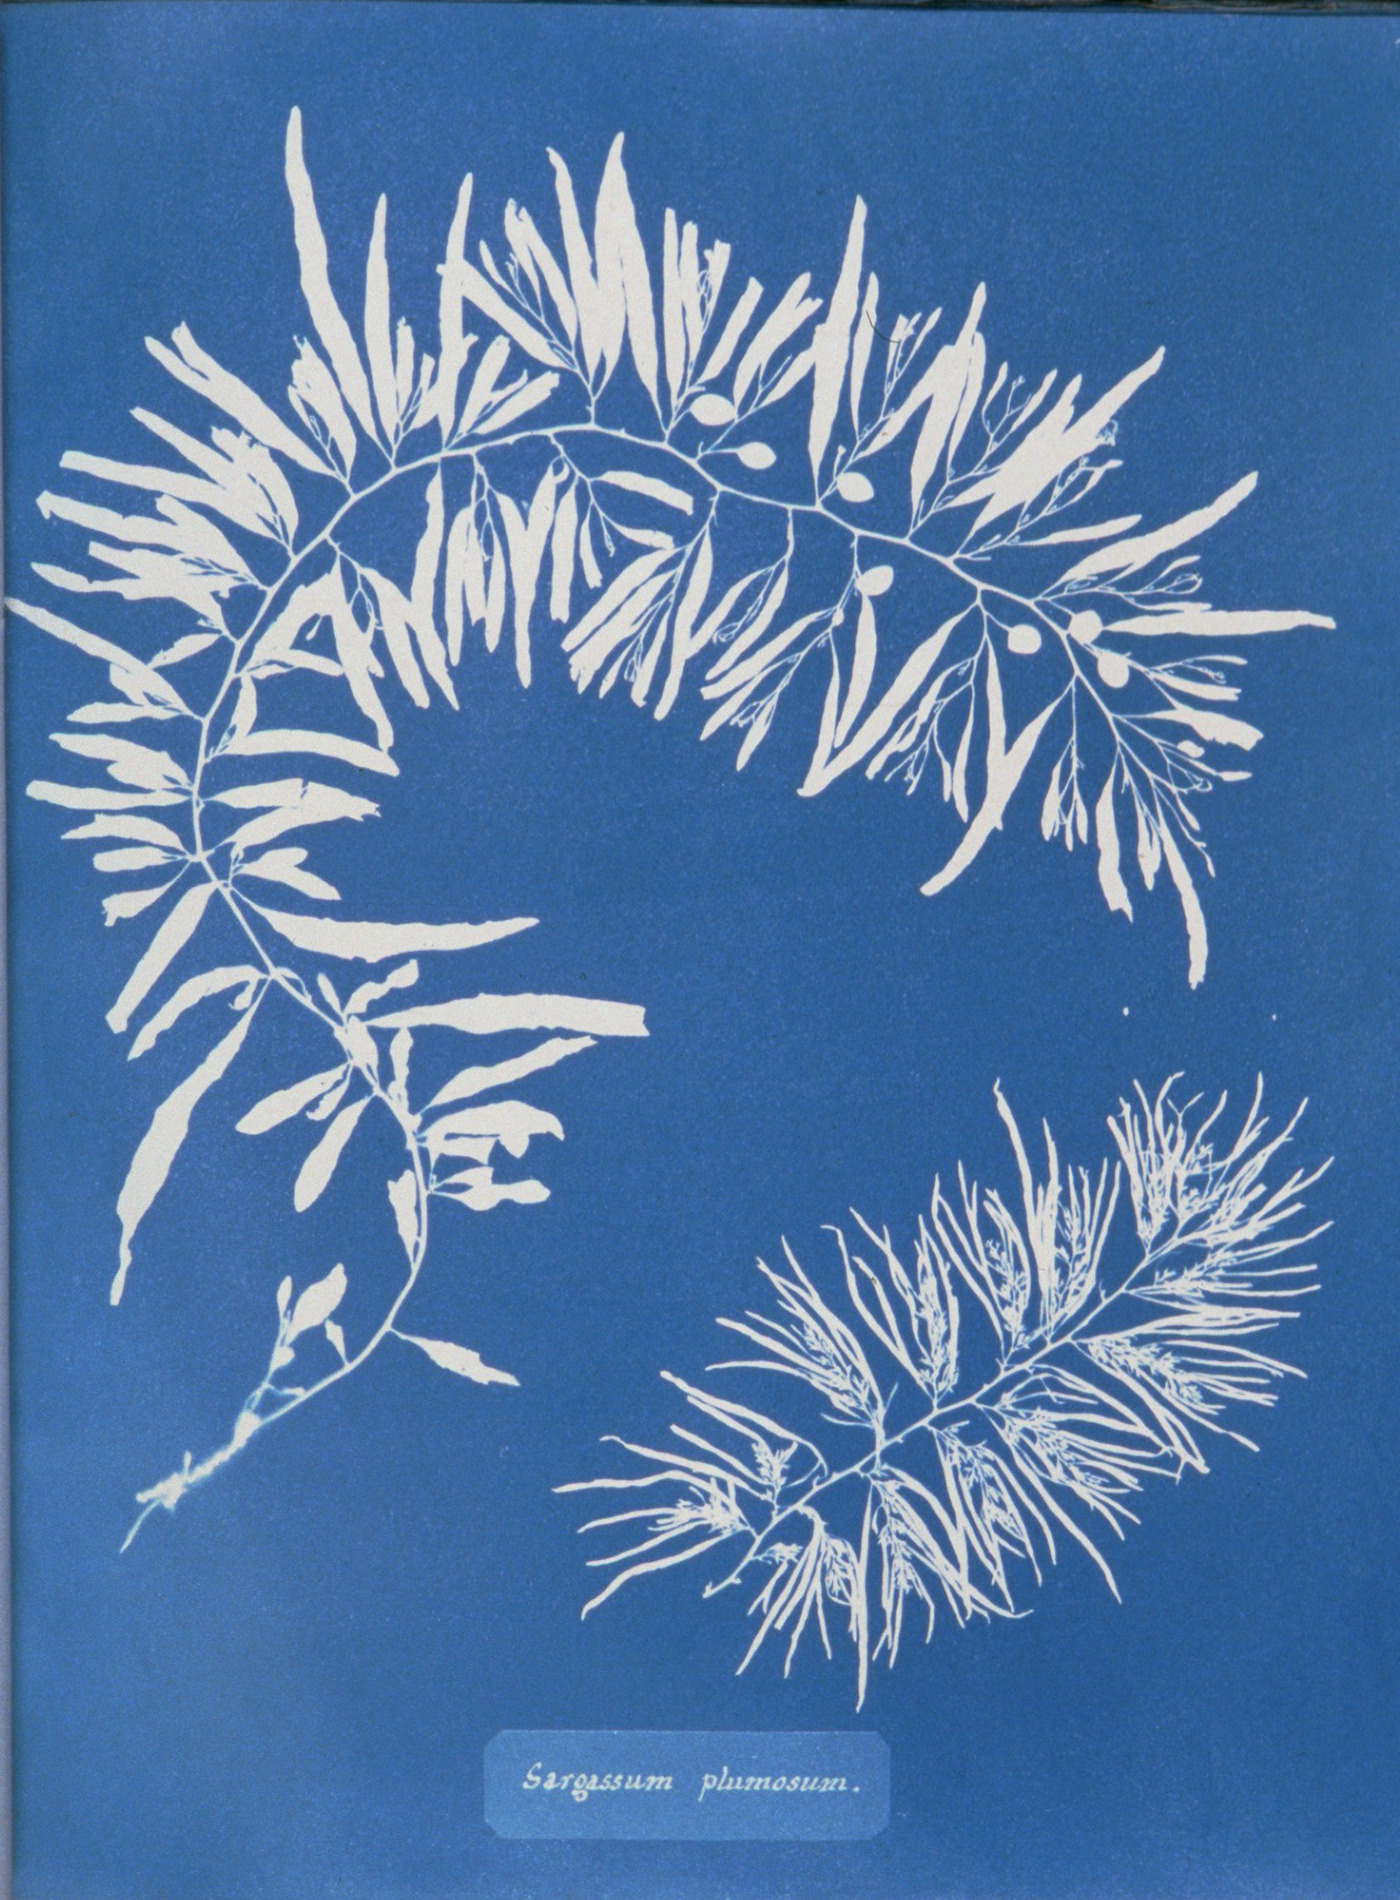 Sargassum plumosum. Courtesy of the Spencer Collection, The New York Public Library